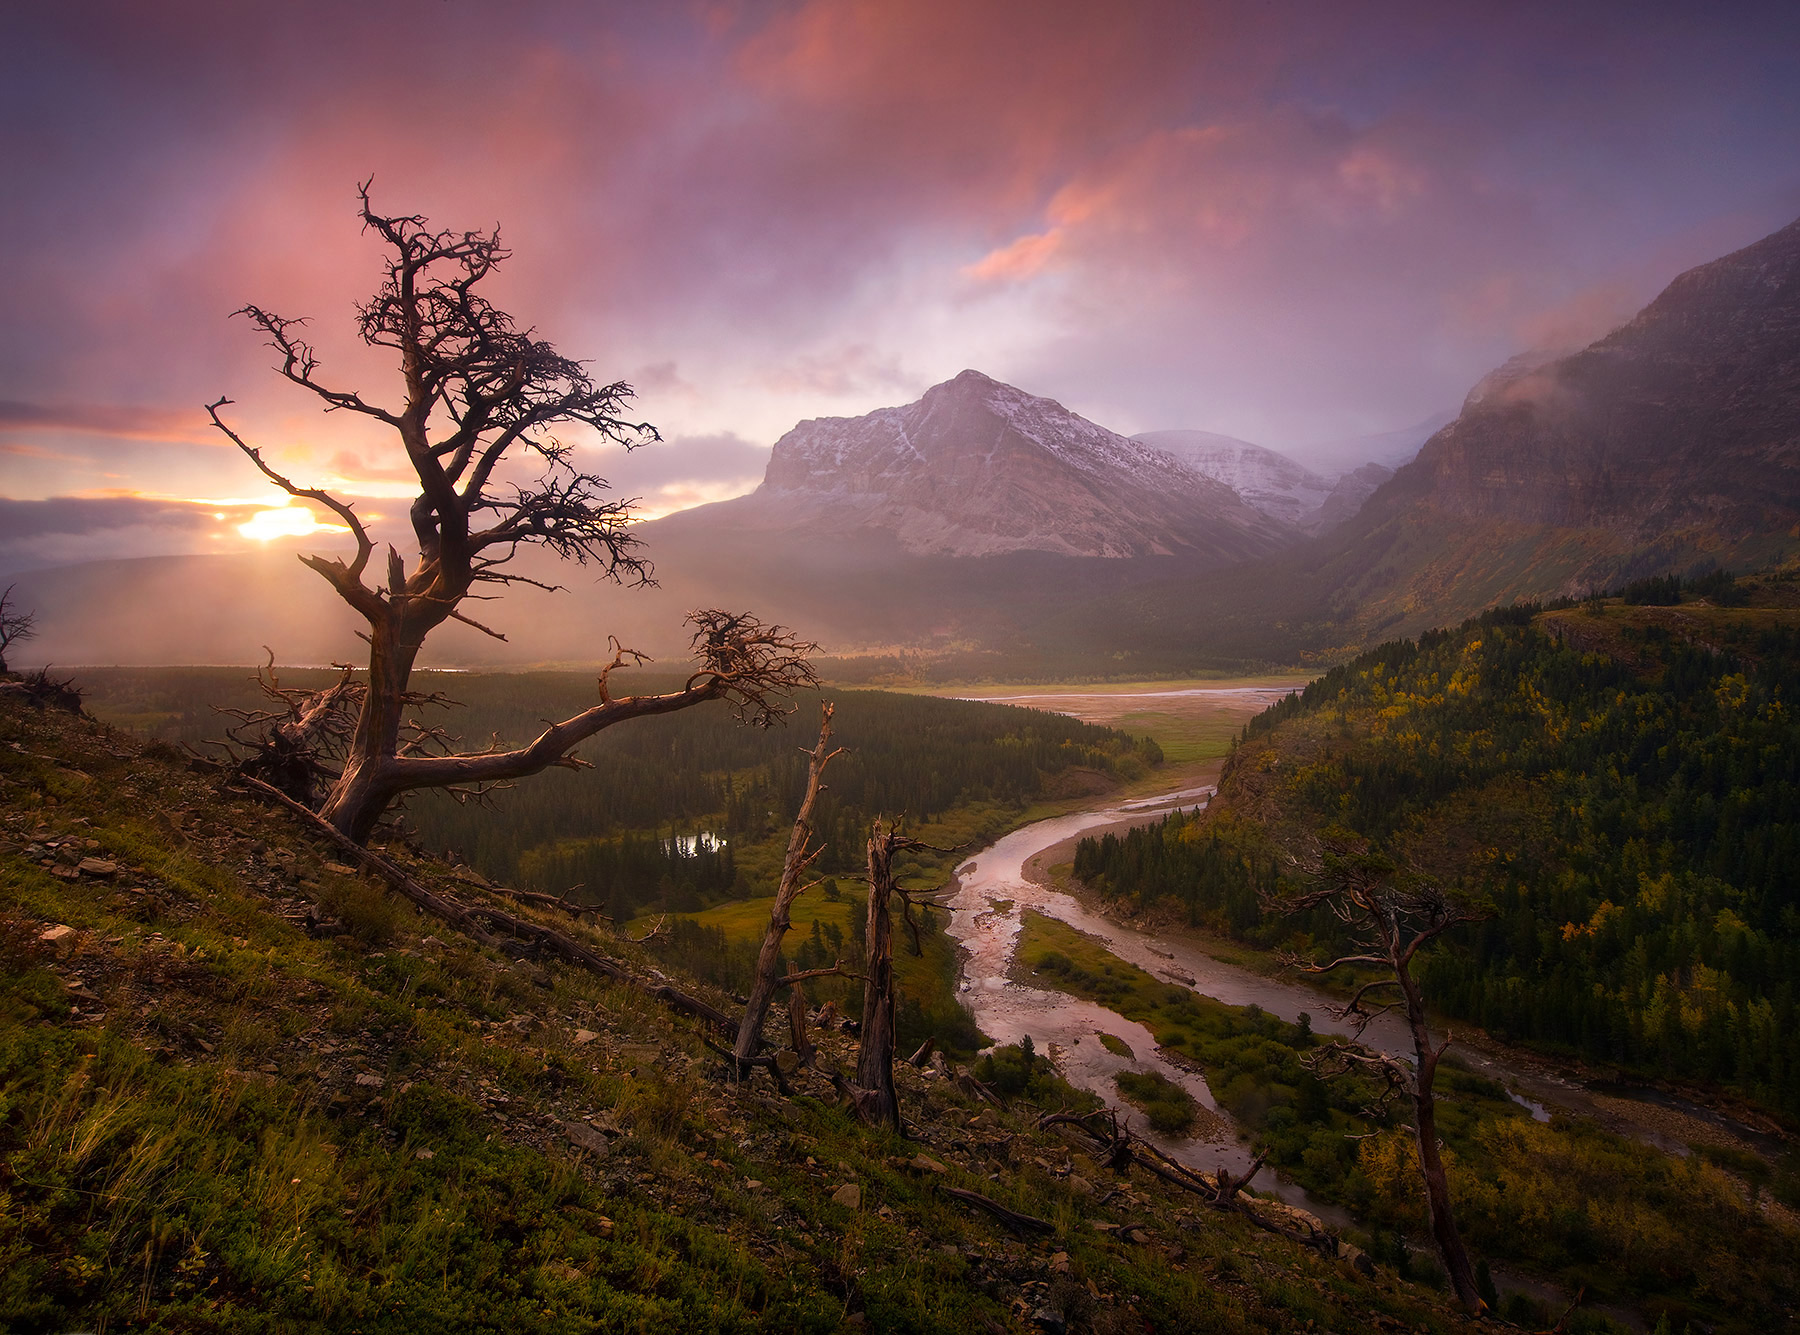 A clearing autumn storm reveals the Eastern peaks of Glacier National Park at sunrise.